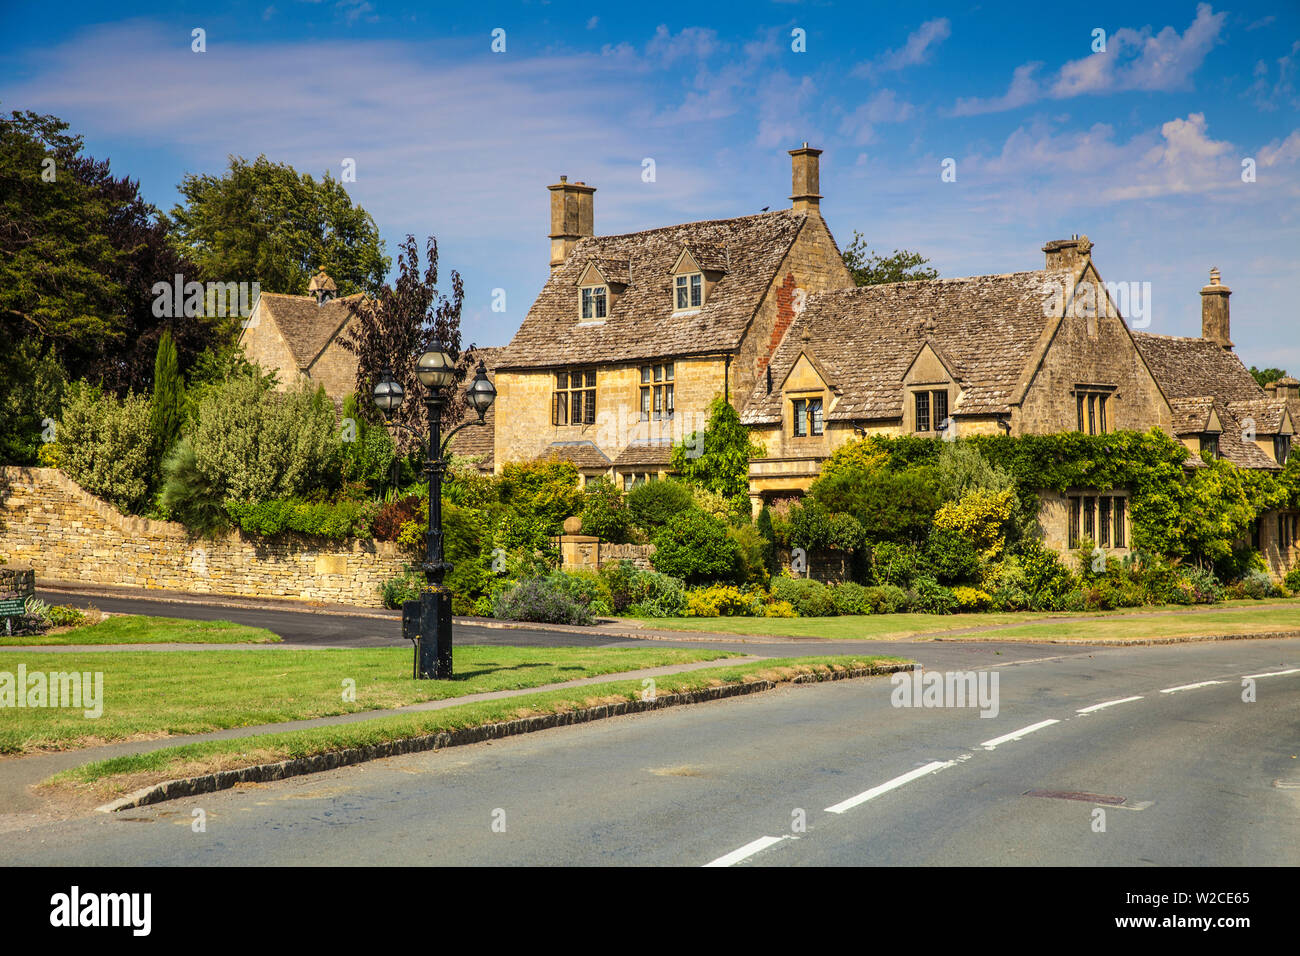 UK, England, Gloucestershire, Cotswold, House in Chipping Campden Stock Photo